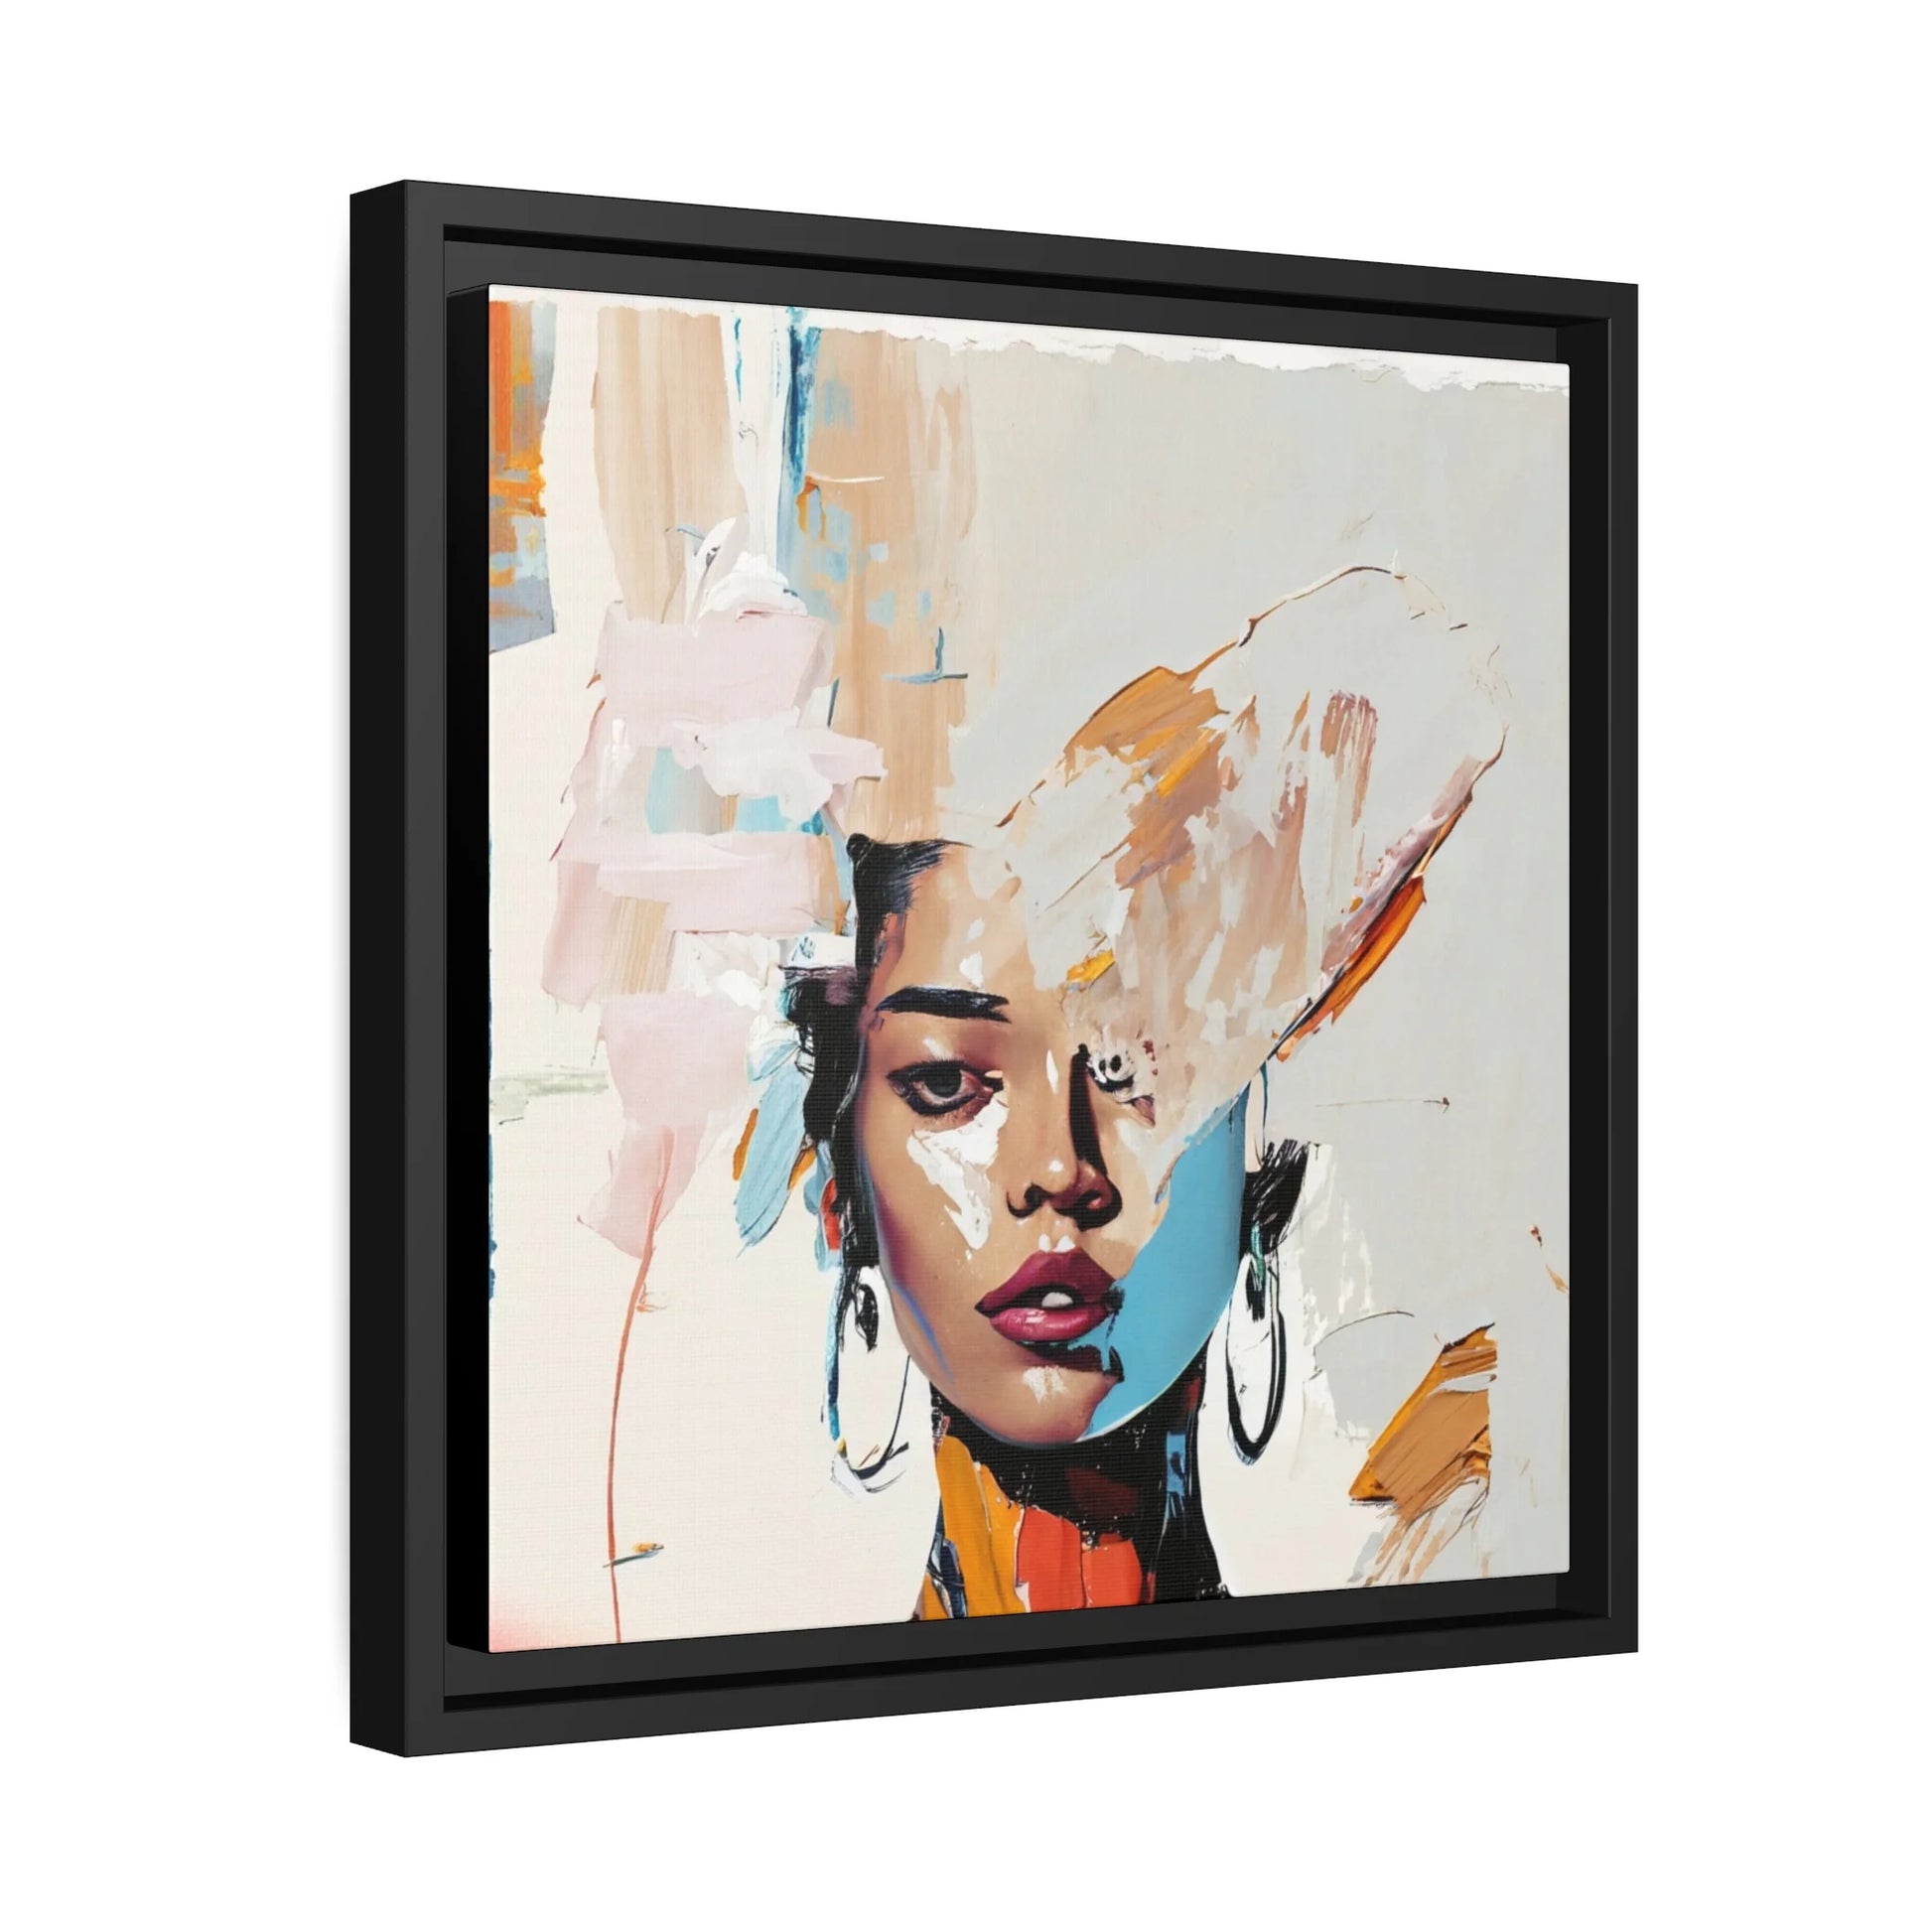 "Contemporary Framed Canvas Wall Art: Abstract Woman Portrait"